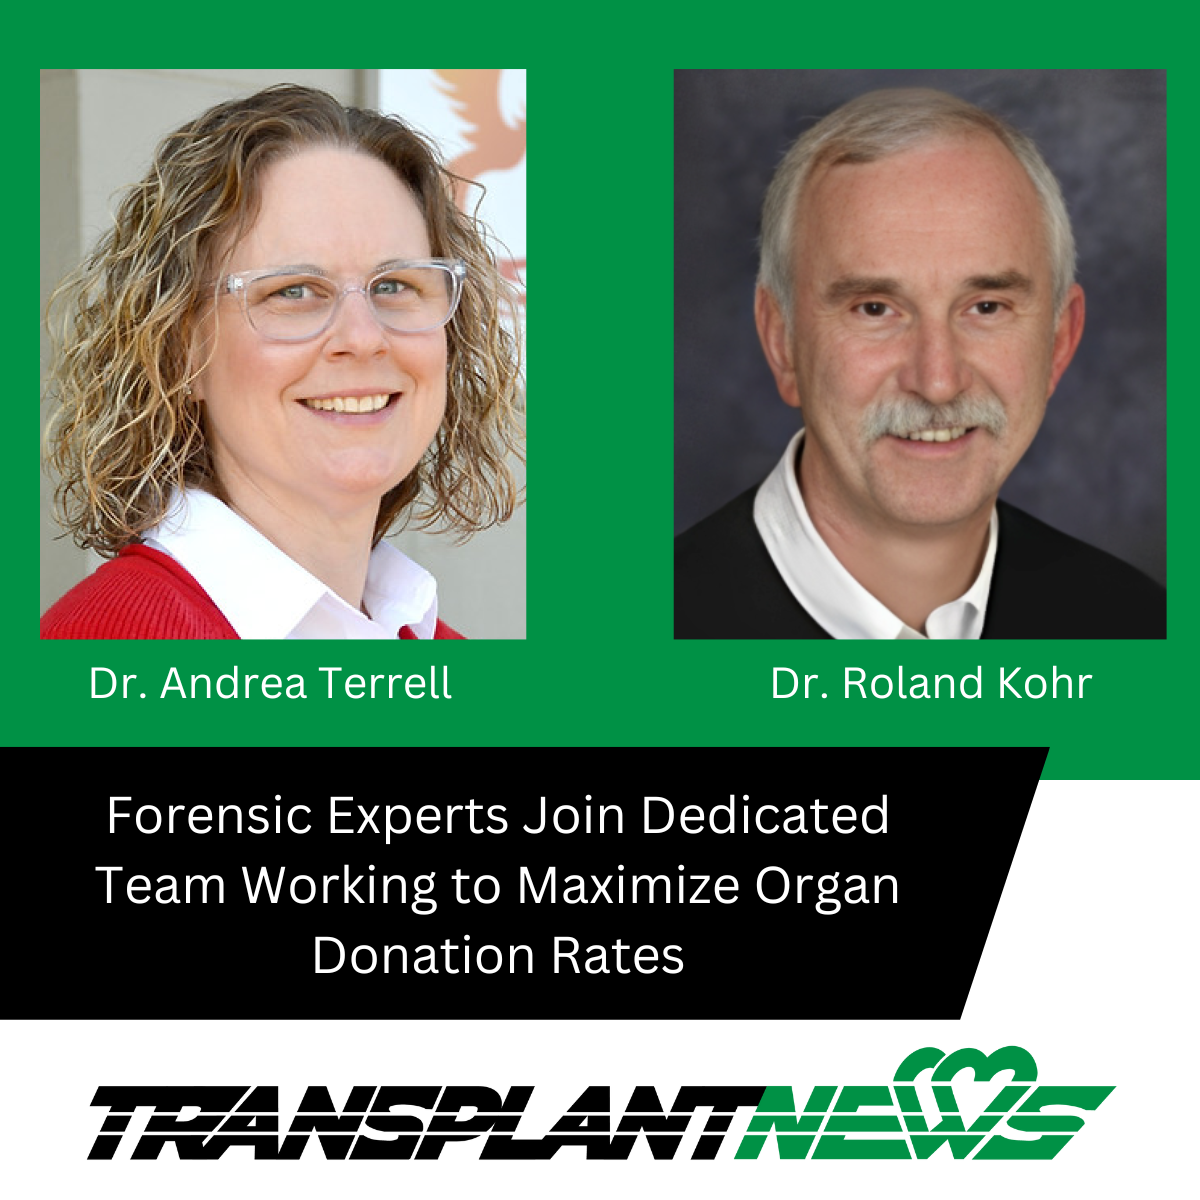 Forensic experts join dedicated team working to maximize organ donation rates